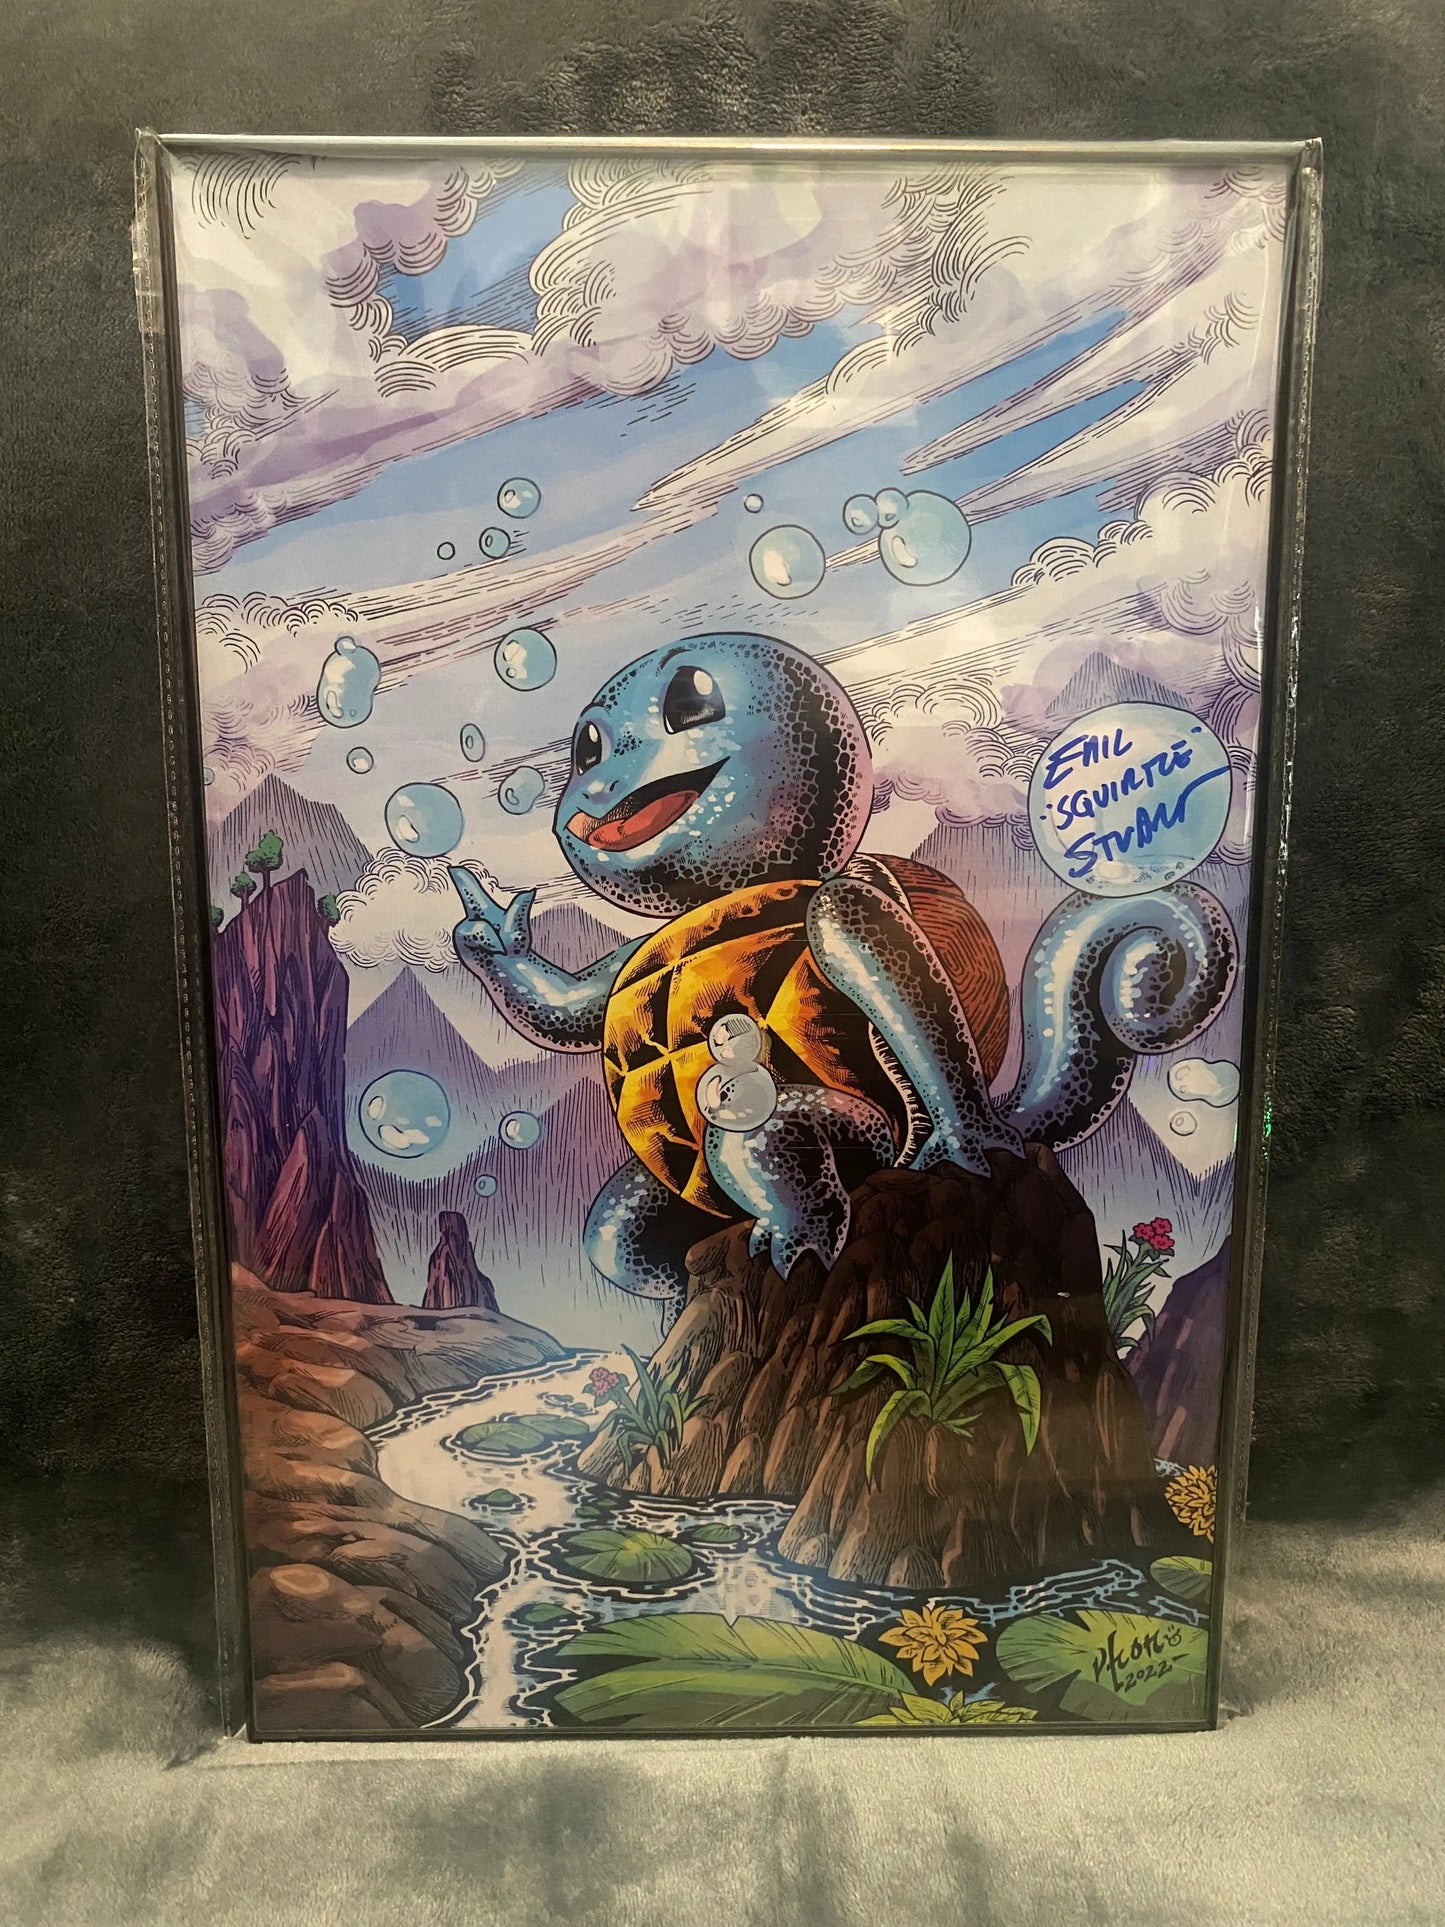 Framed Squirtle 11x17 print Signed by Eric Stuart